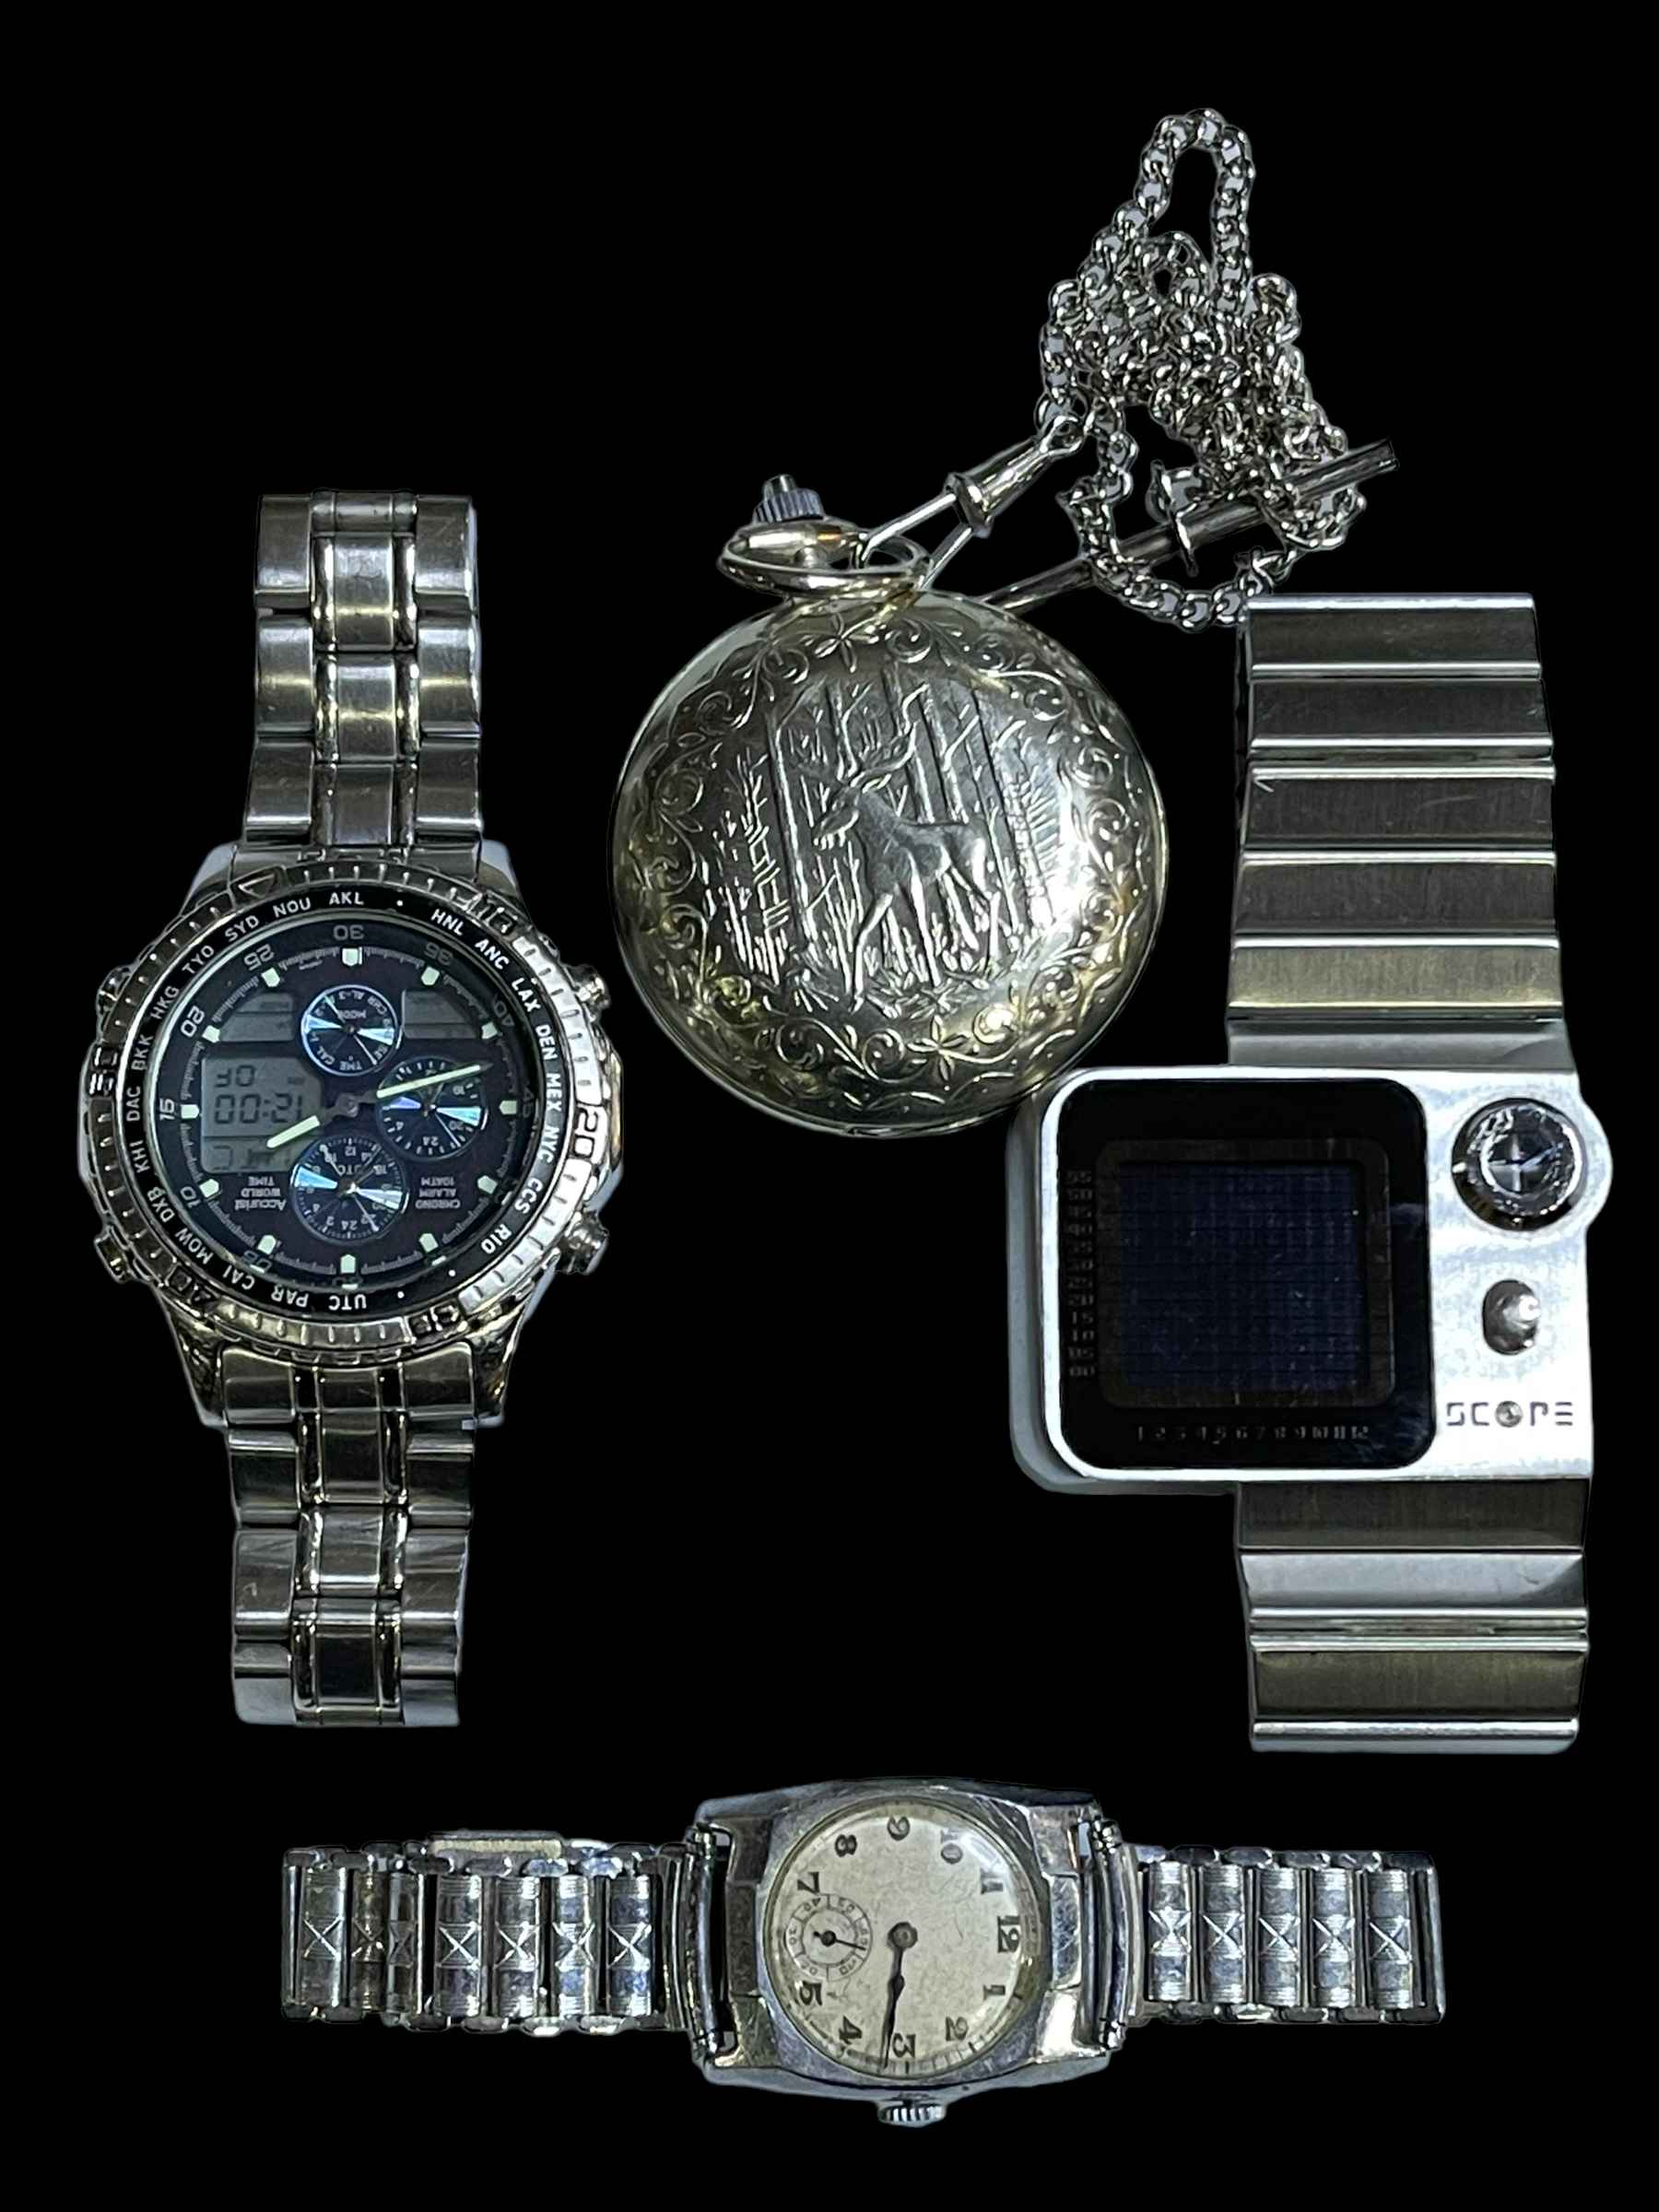 Three wristwatches inc Tokyo Flash - Japanese transformers scope LED watch and pocket watch.